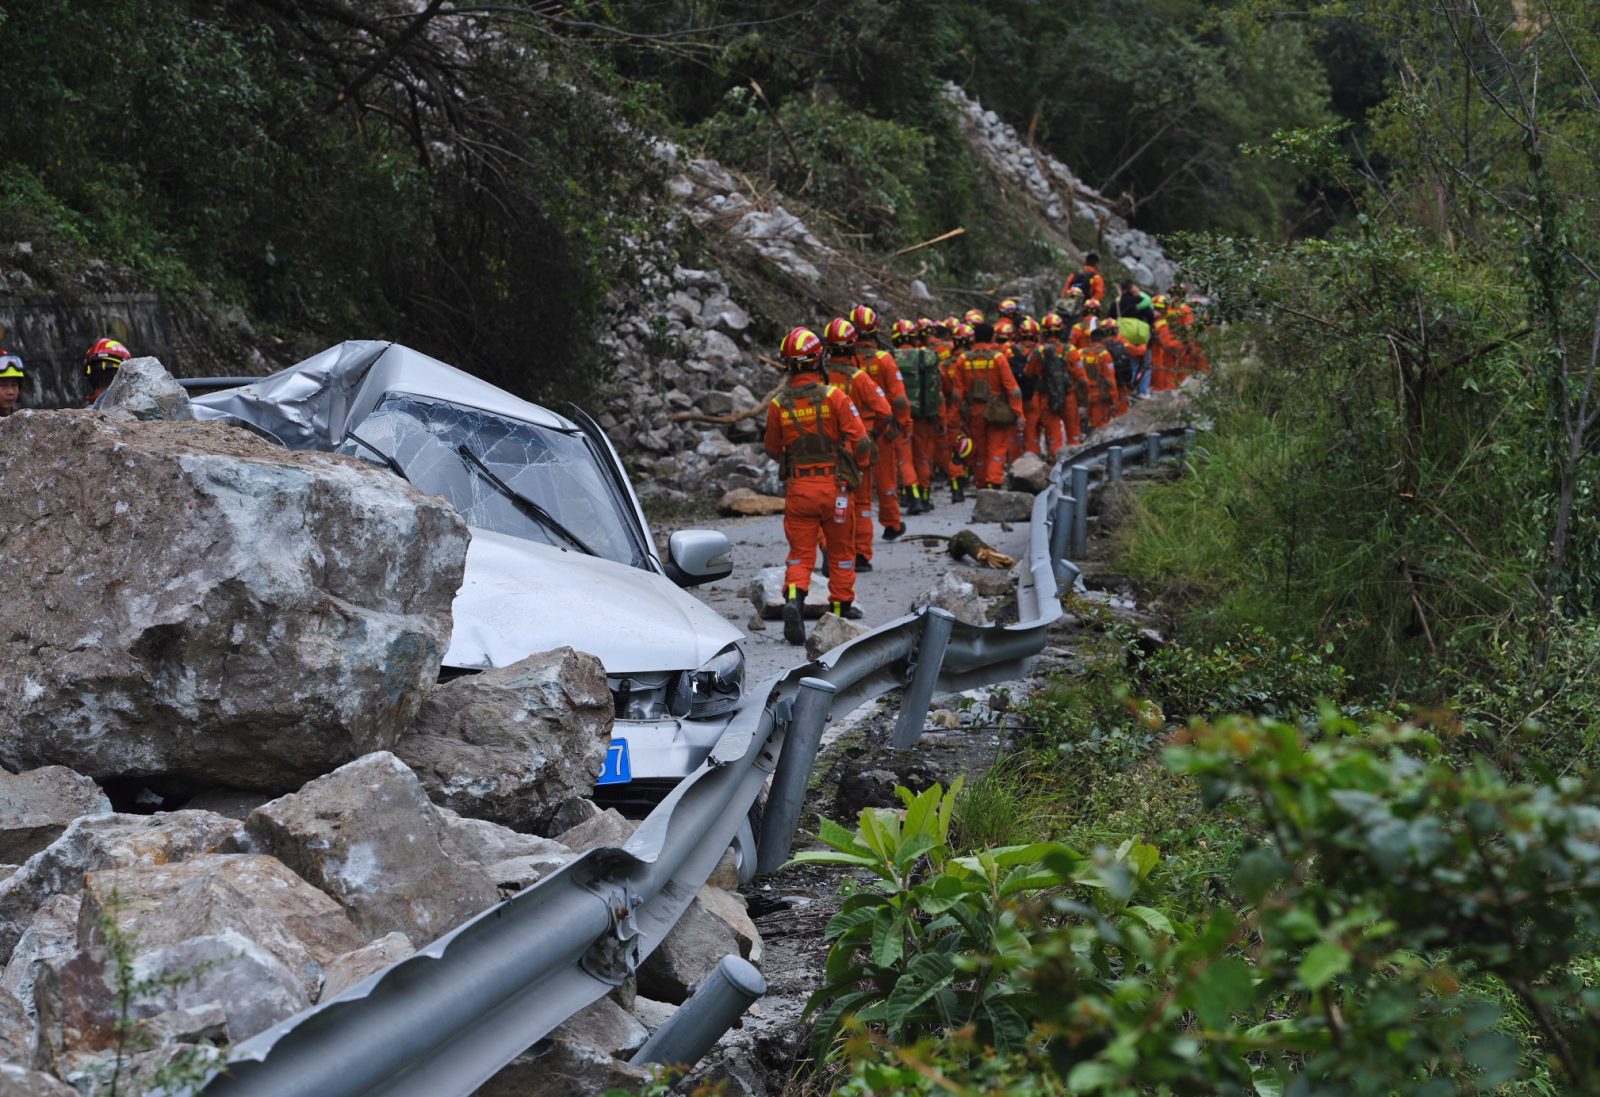 epa10163823 Rescuers search for the injured people after the earthquake in Luding county, Ganzi prefecture, Sichuan Province, China, 06 September 2022. A 6.8 magnitude earthquake hit China’s southwest Sichuan province on 05 September. According to state media, the death toll has risen to at least 65 people, with more than 10 people missing and 200 injured. The strongest earthquake in the region since 2017 triggered landslides and shook the provincial capital Chengdu, whose 21 million residents are already under a COVID-19 lockdown. Chinese rescue teams saved 15 people while still trying to evacuate 1000 villagers from the epicenter in Luding that got isolated by the landslide.  EPA/STRINGER CHINA OUT